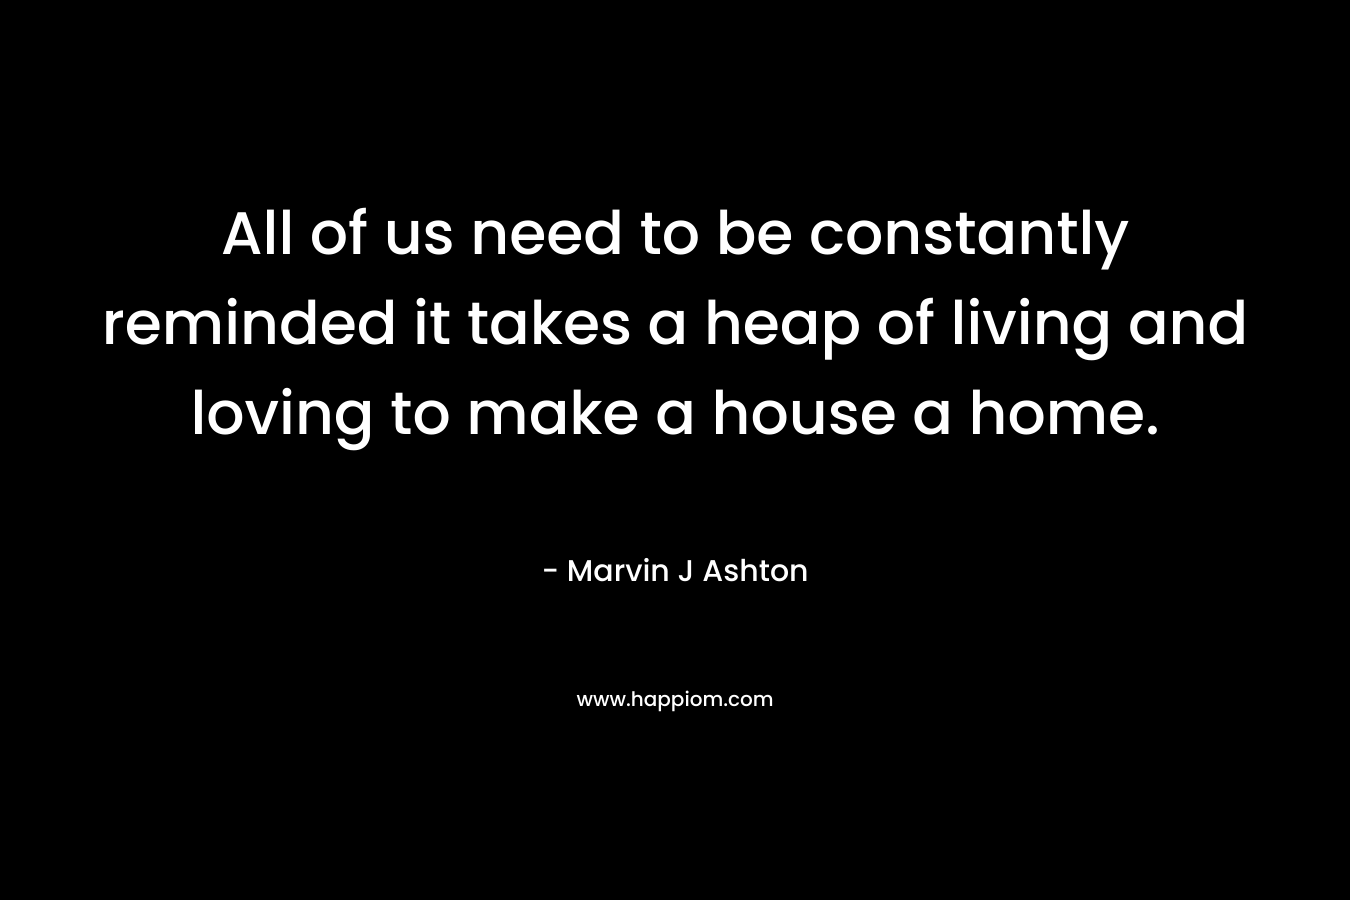 All of us need to be constantly reminded it takes a heap of living and loving to make a house a home.